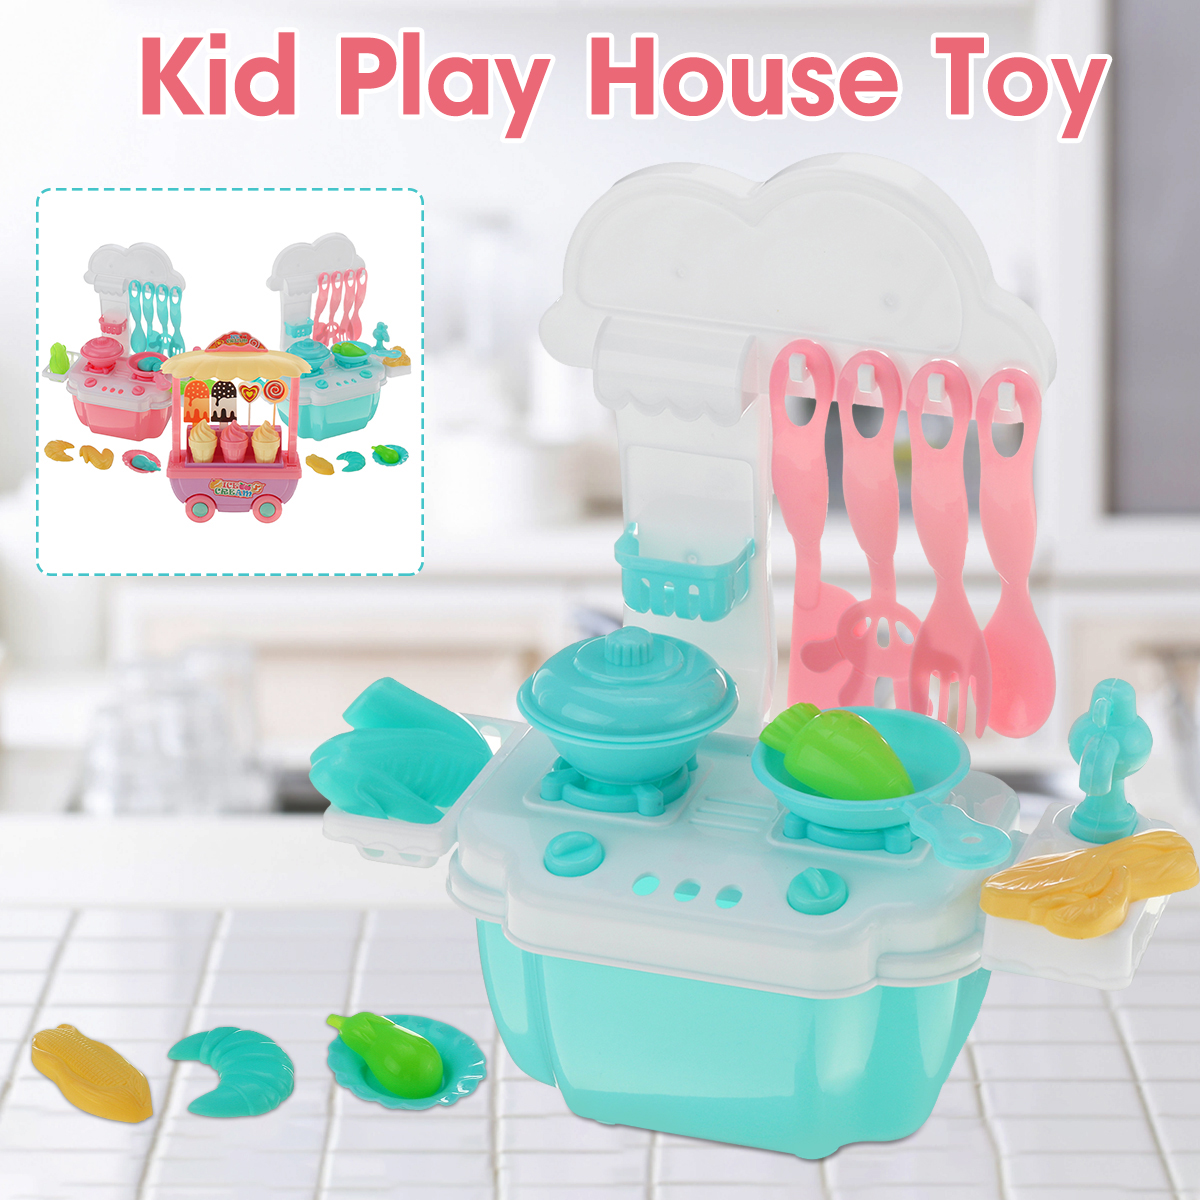 Kid-Play-House-Toy-Kitchen-Cooking-Pots-Pans-Food-Dishes-Cookware-Toys-1628195-3